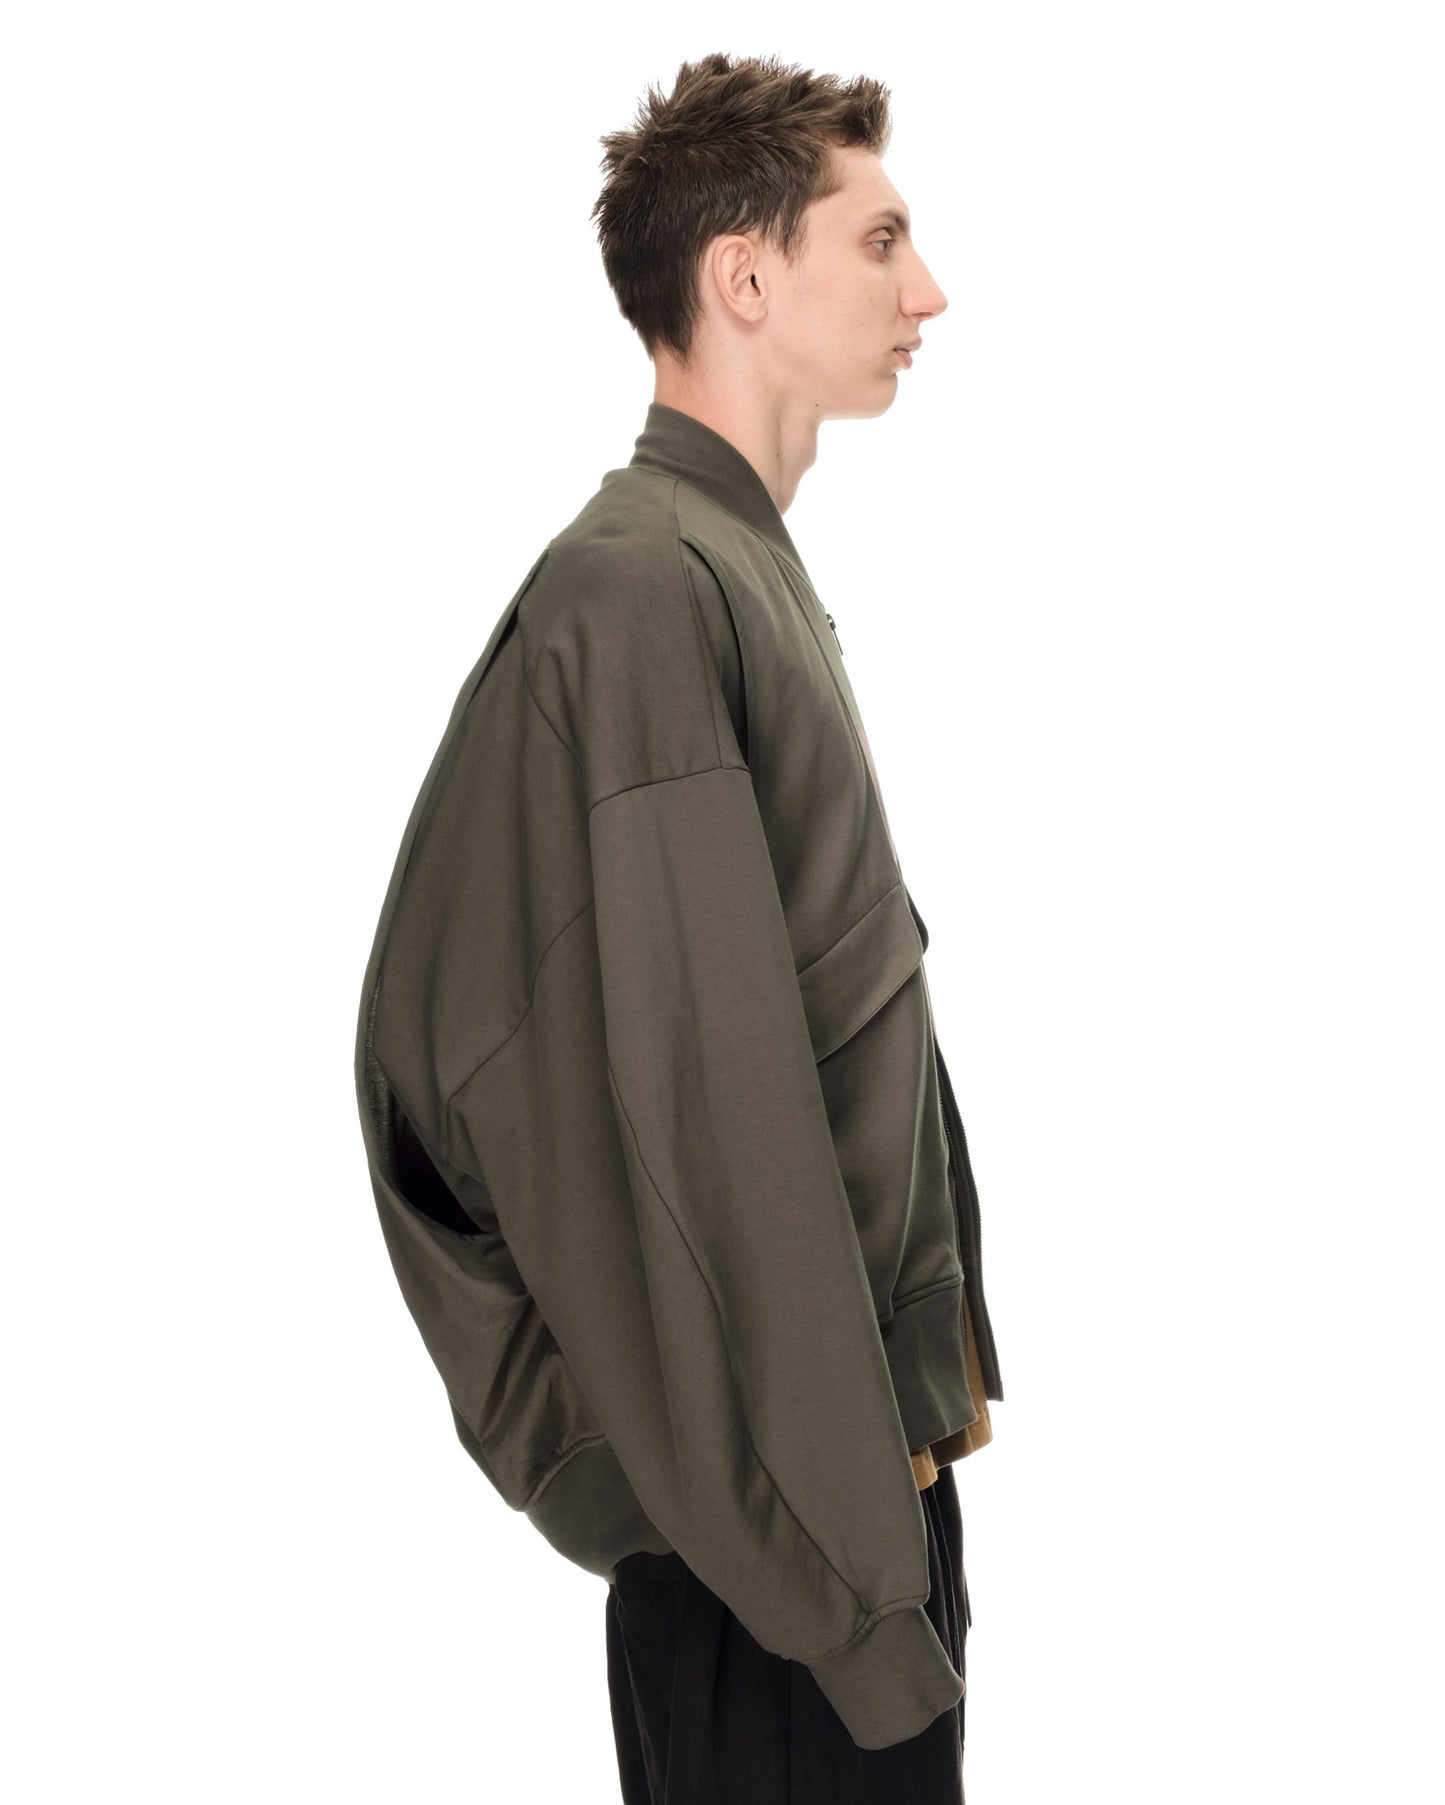 TED LAYERED BOMBER